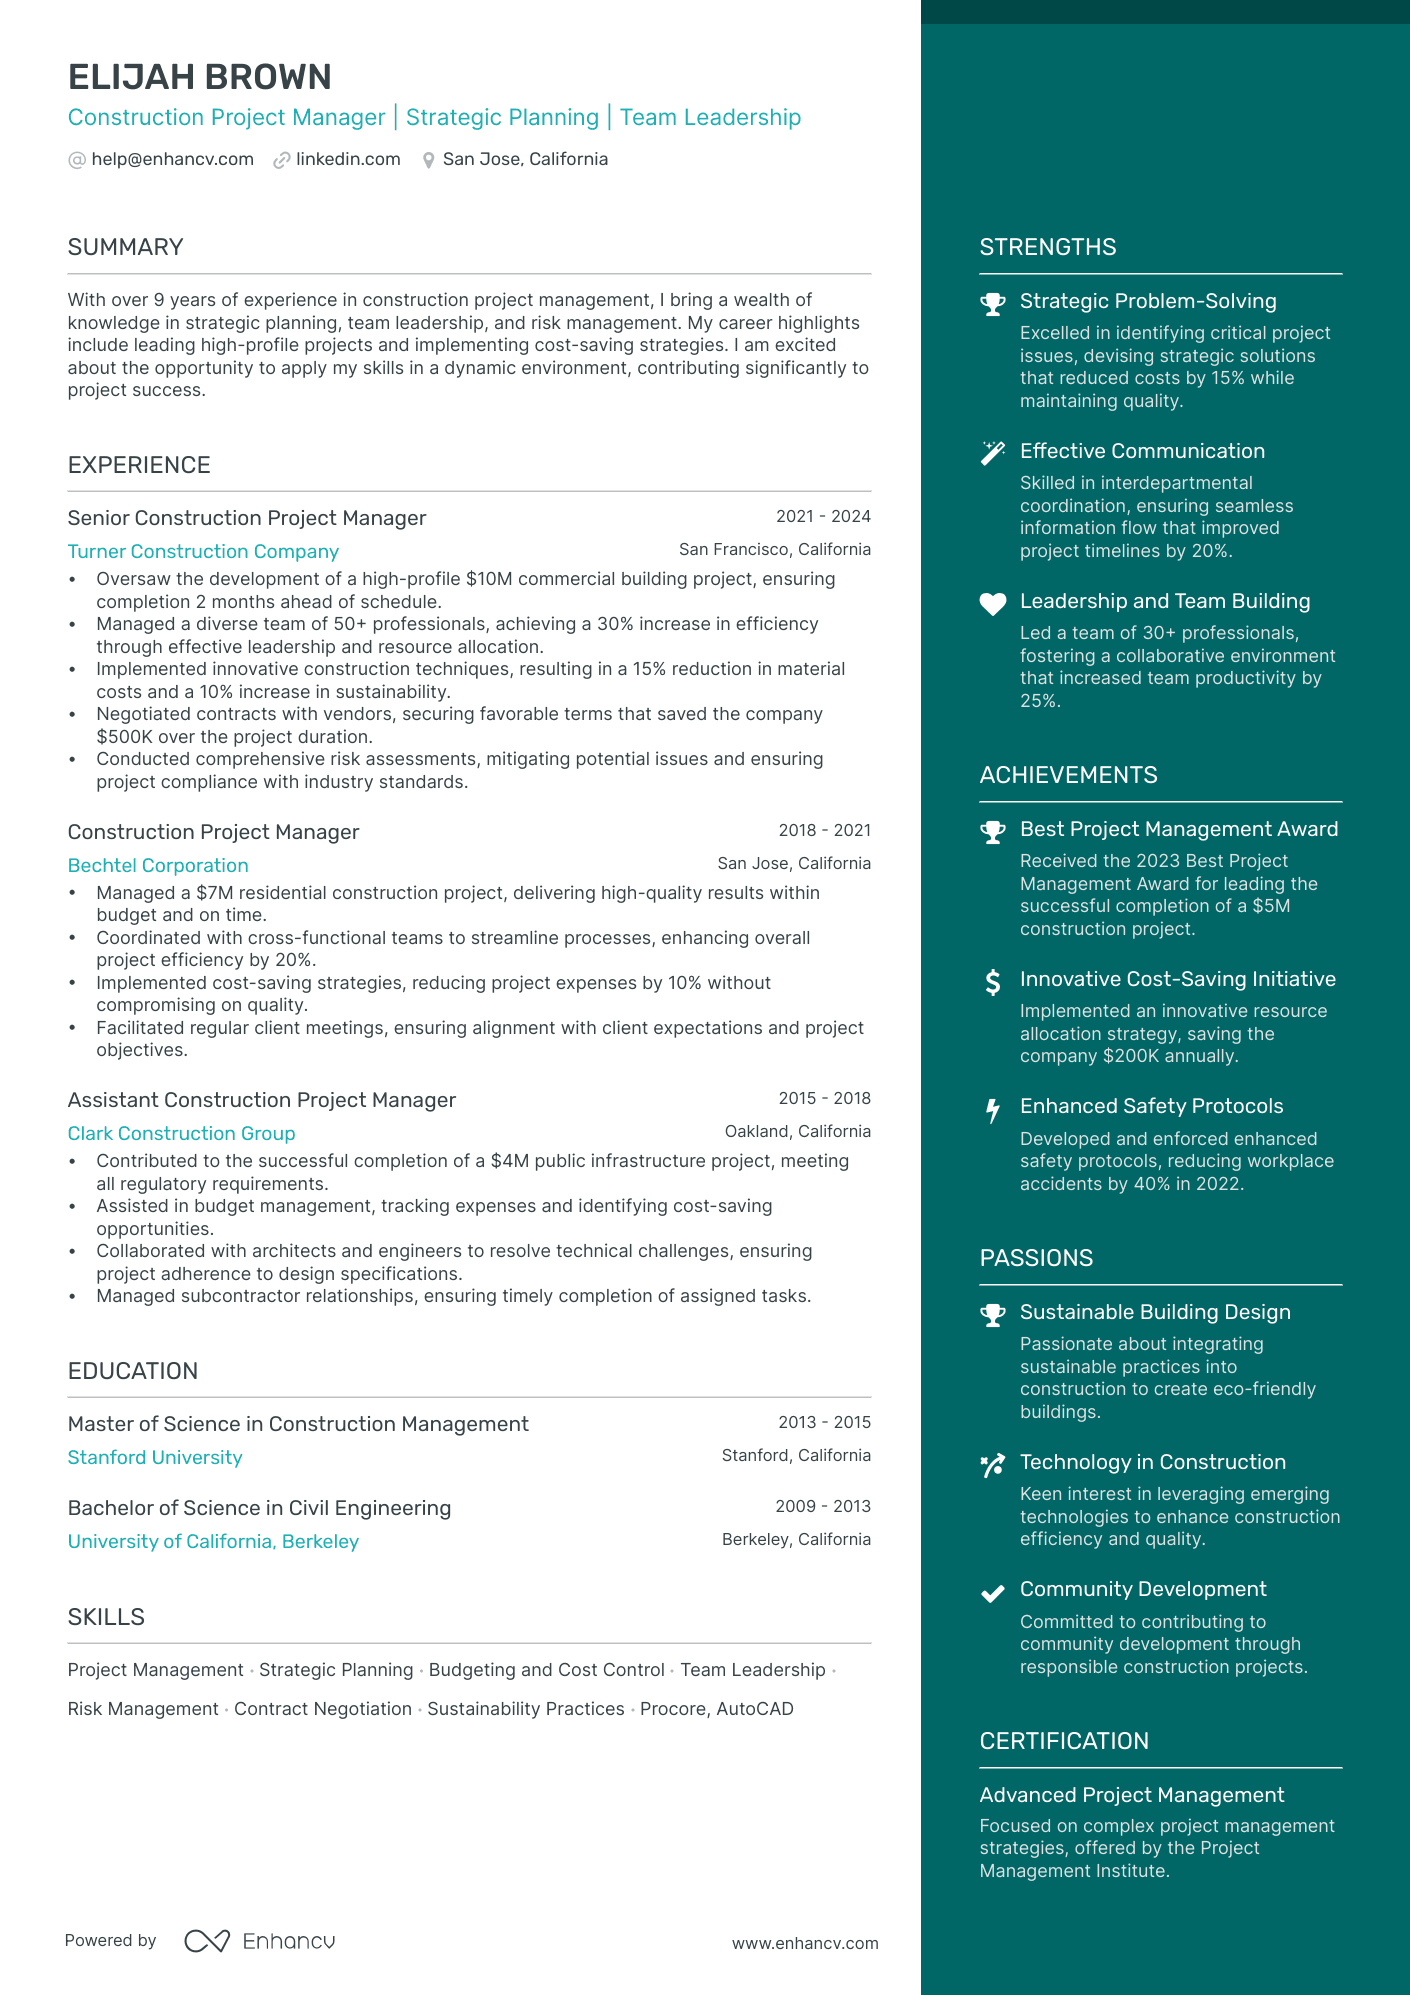 Construction Project Manager | Strategic Planning | Team Leadership resume example